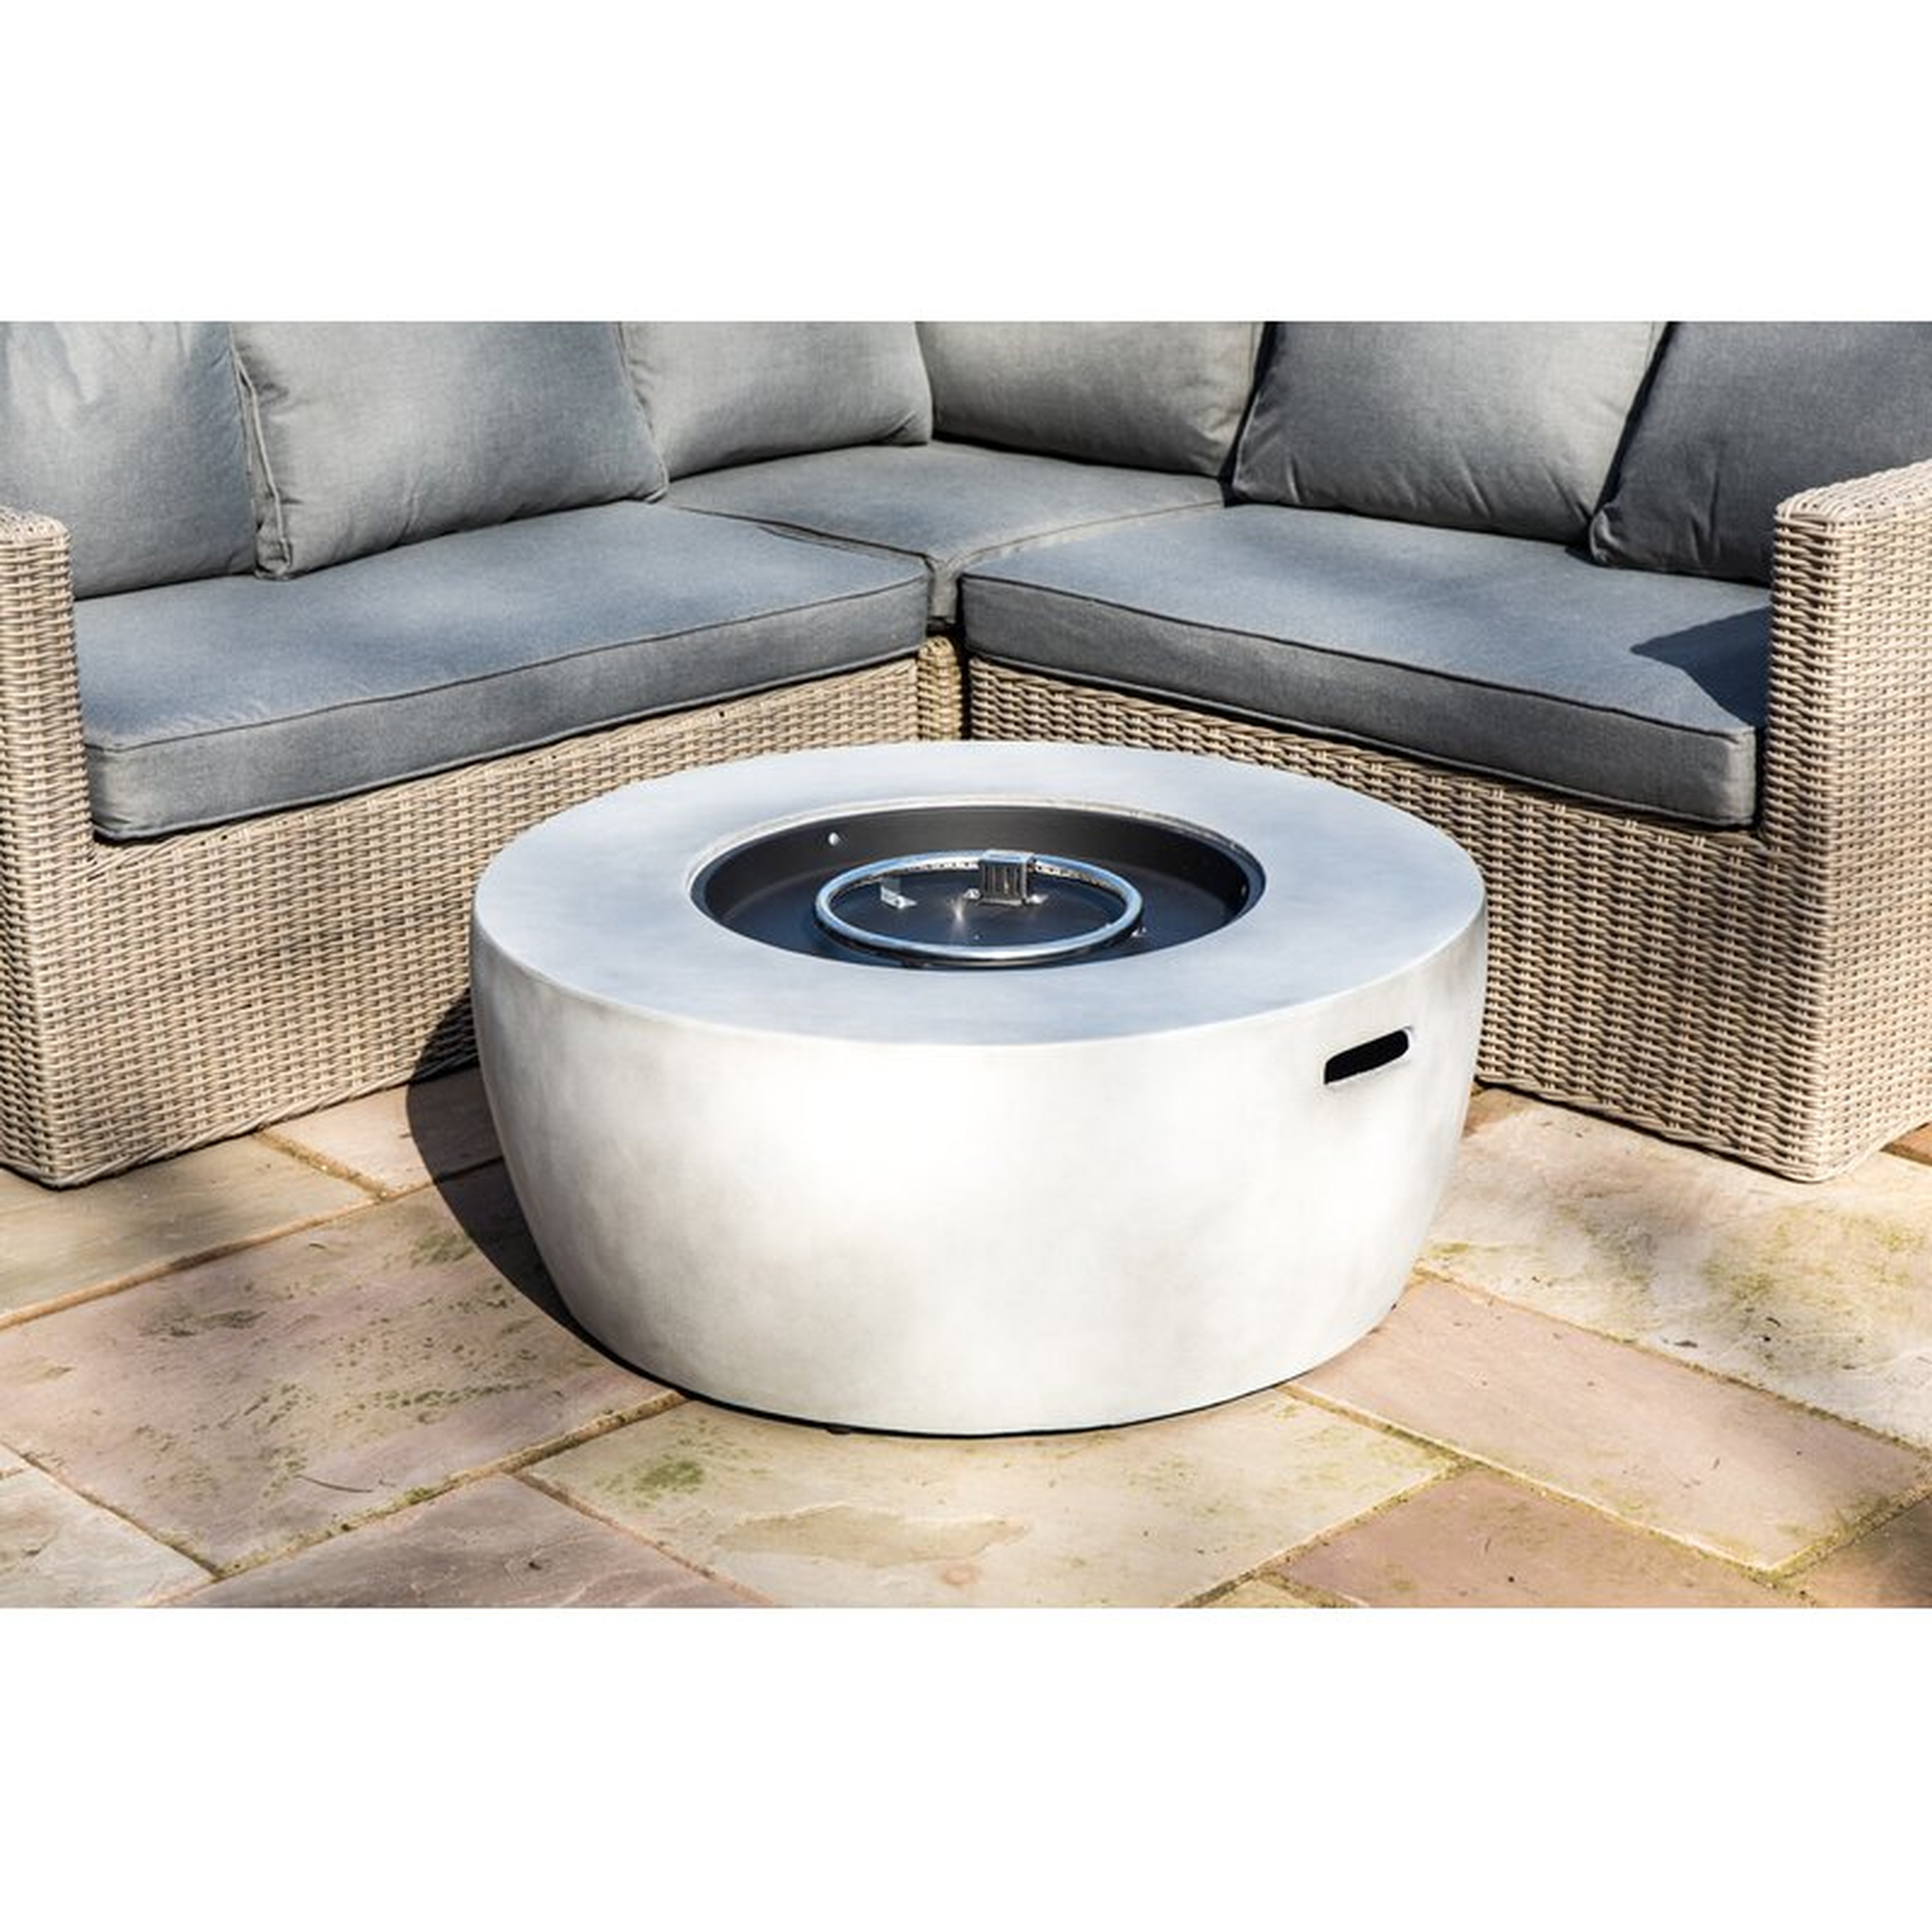 Bogaerts Concrete Propane Fire Pit- comes with cover - Wayfair